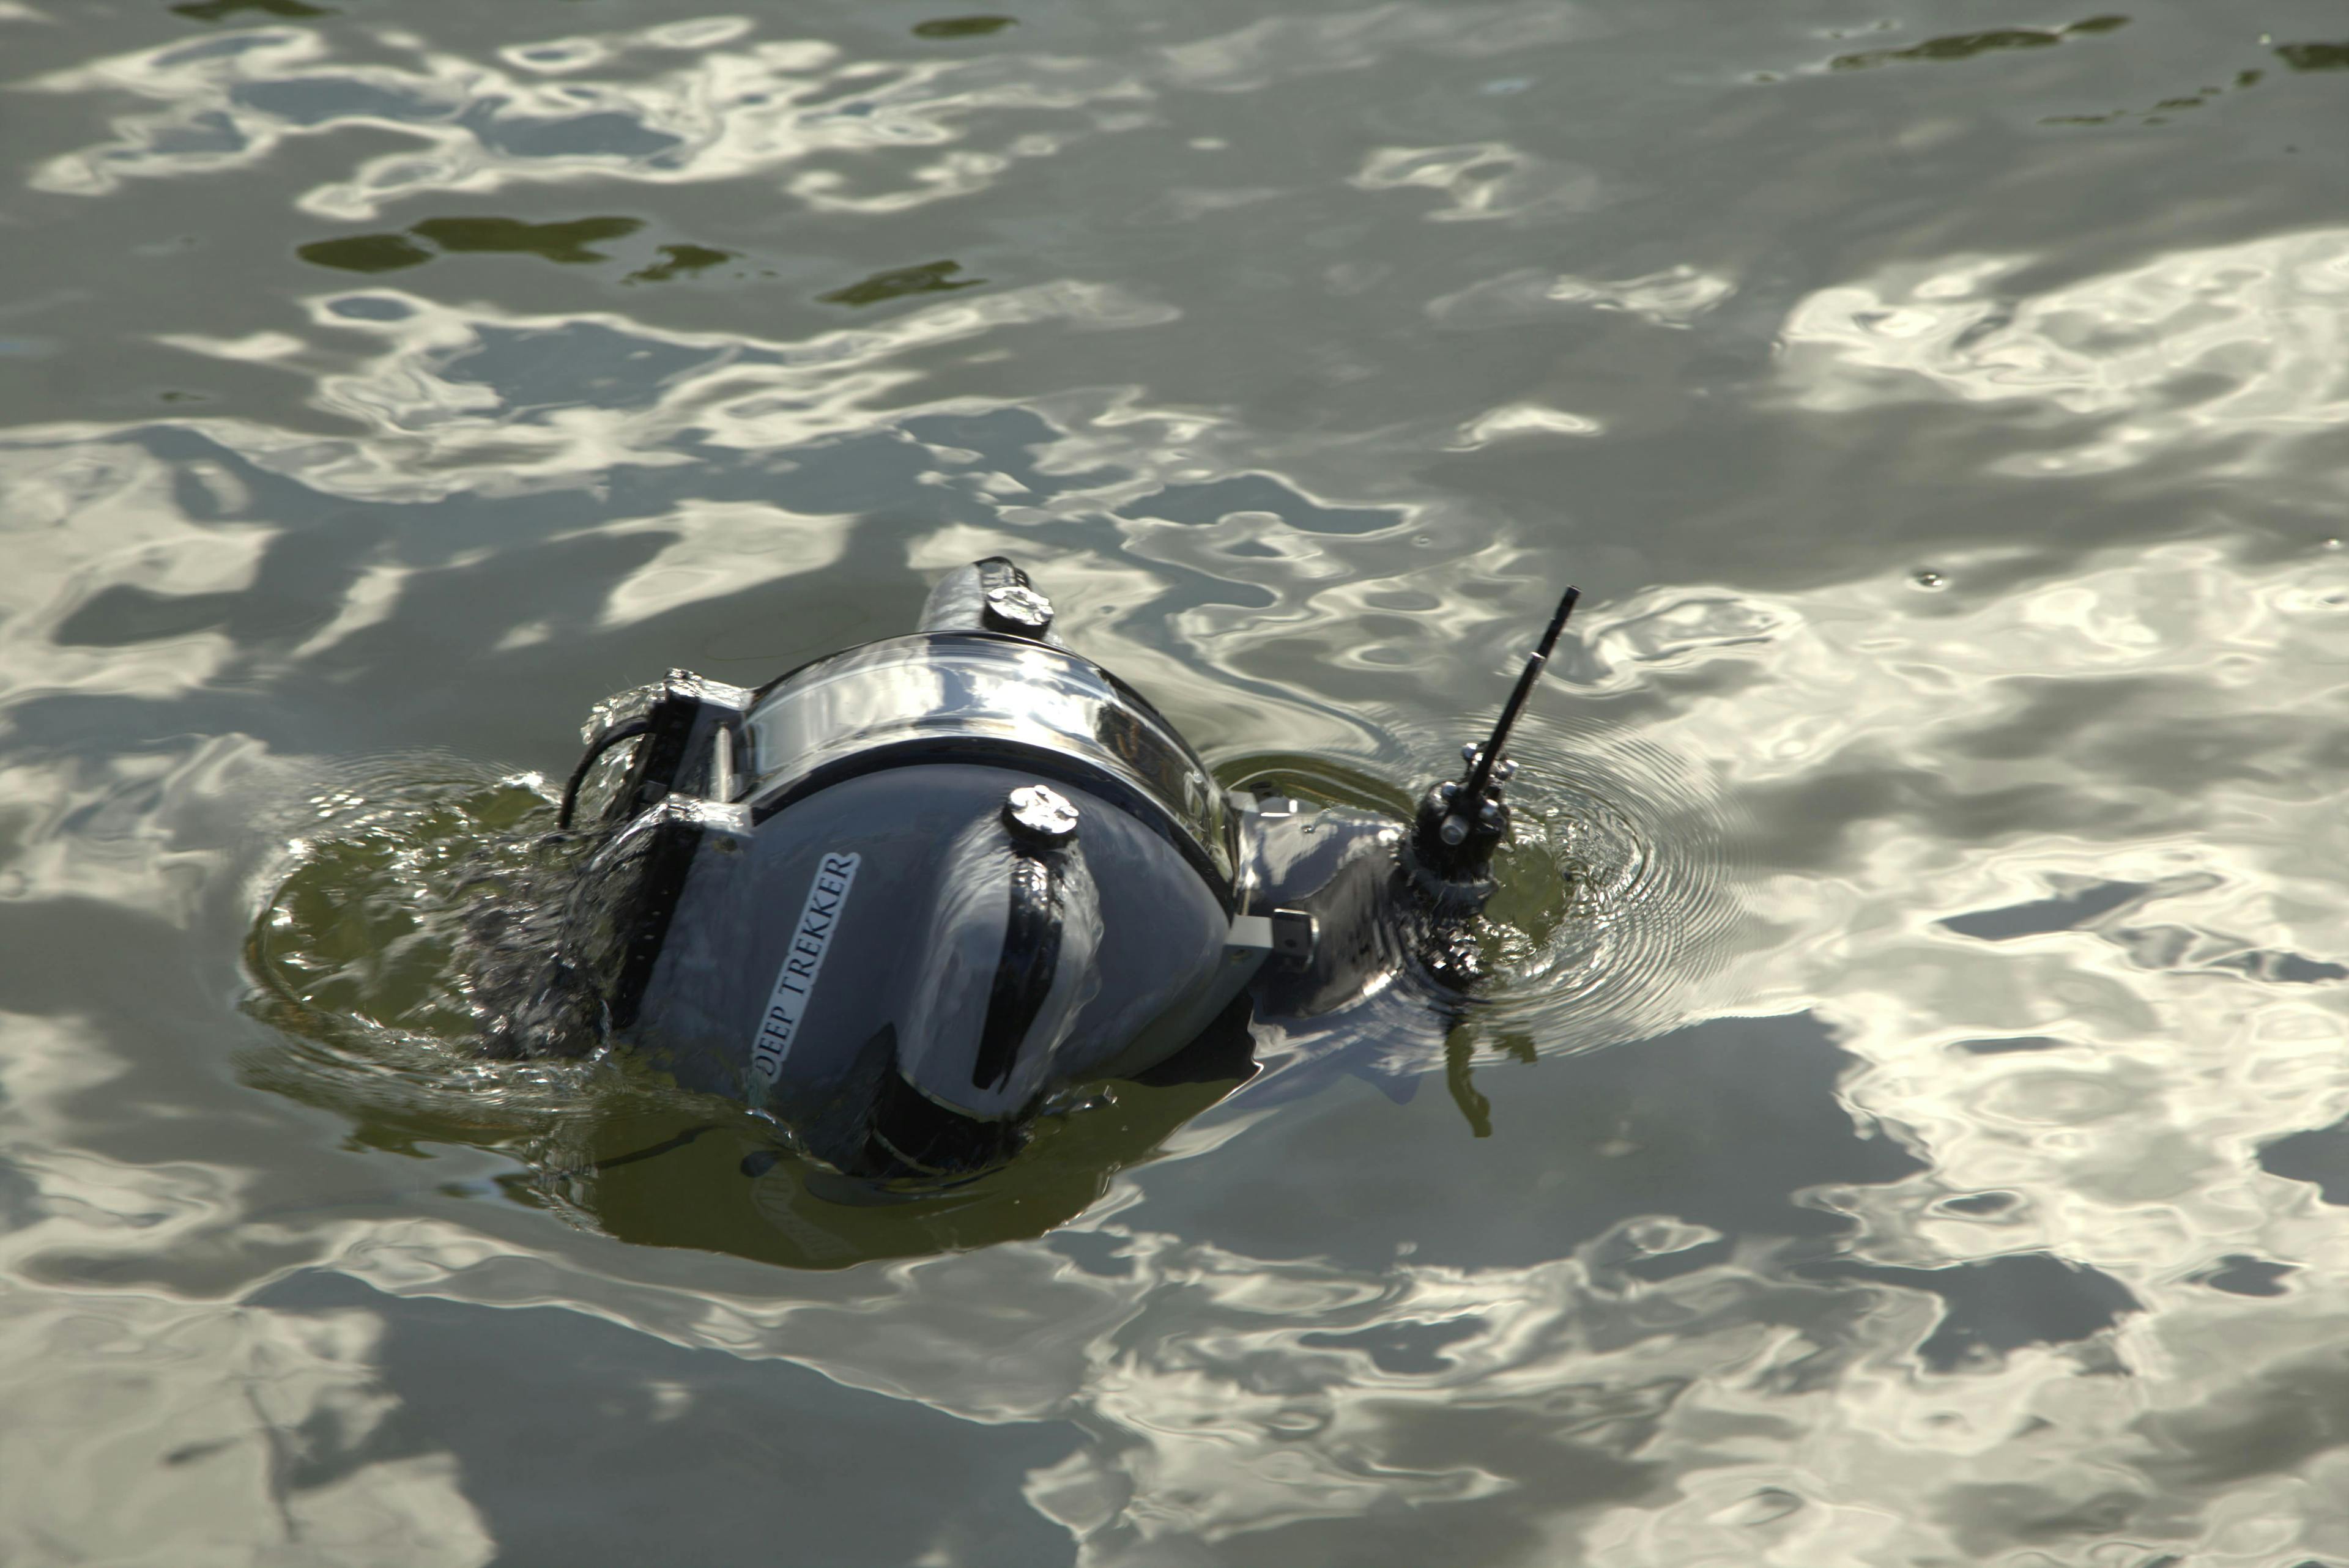 The Deep Trekker DTG3 underwater ROV surfacing out of grey water with the grabber arm coming out of the water first 